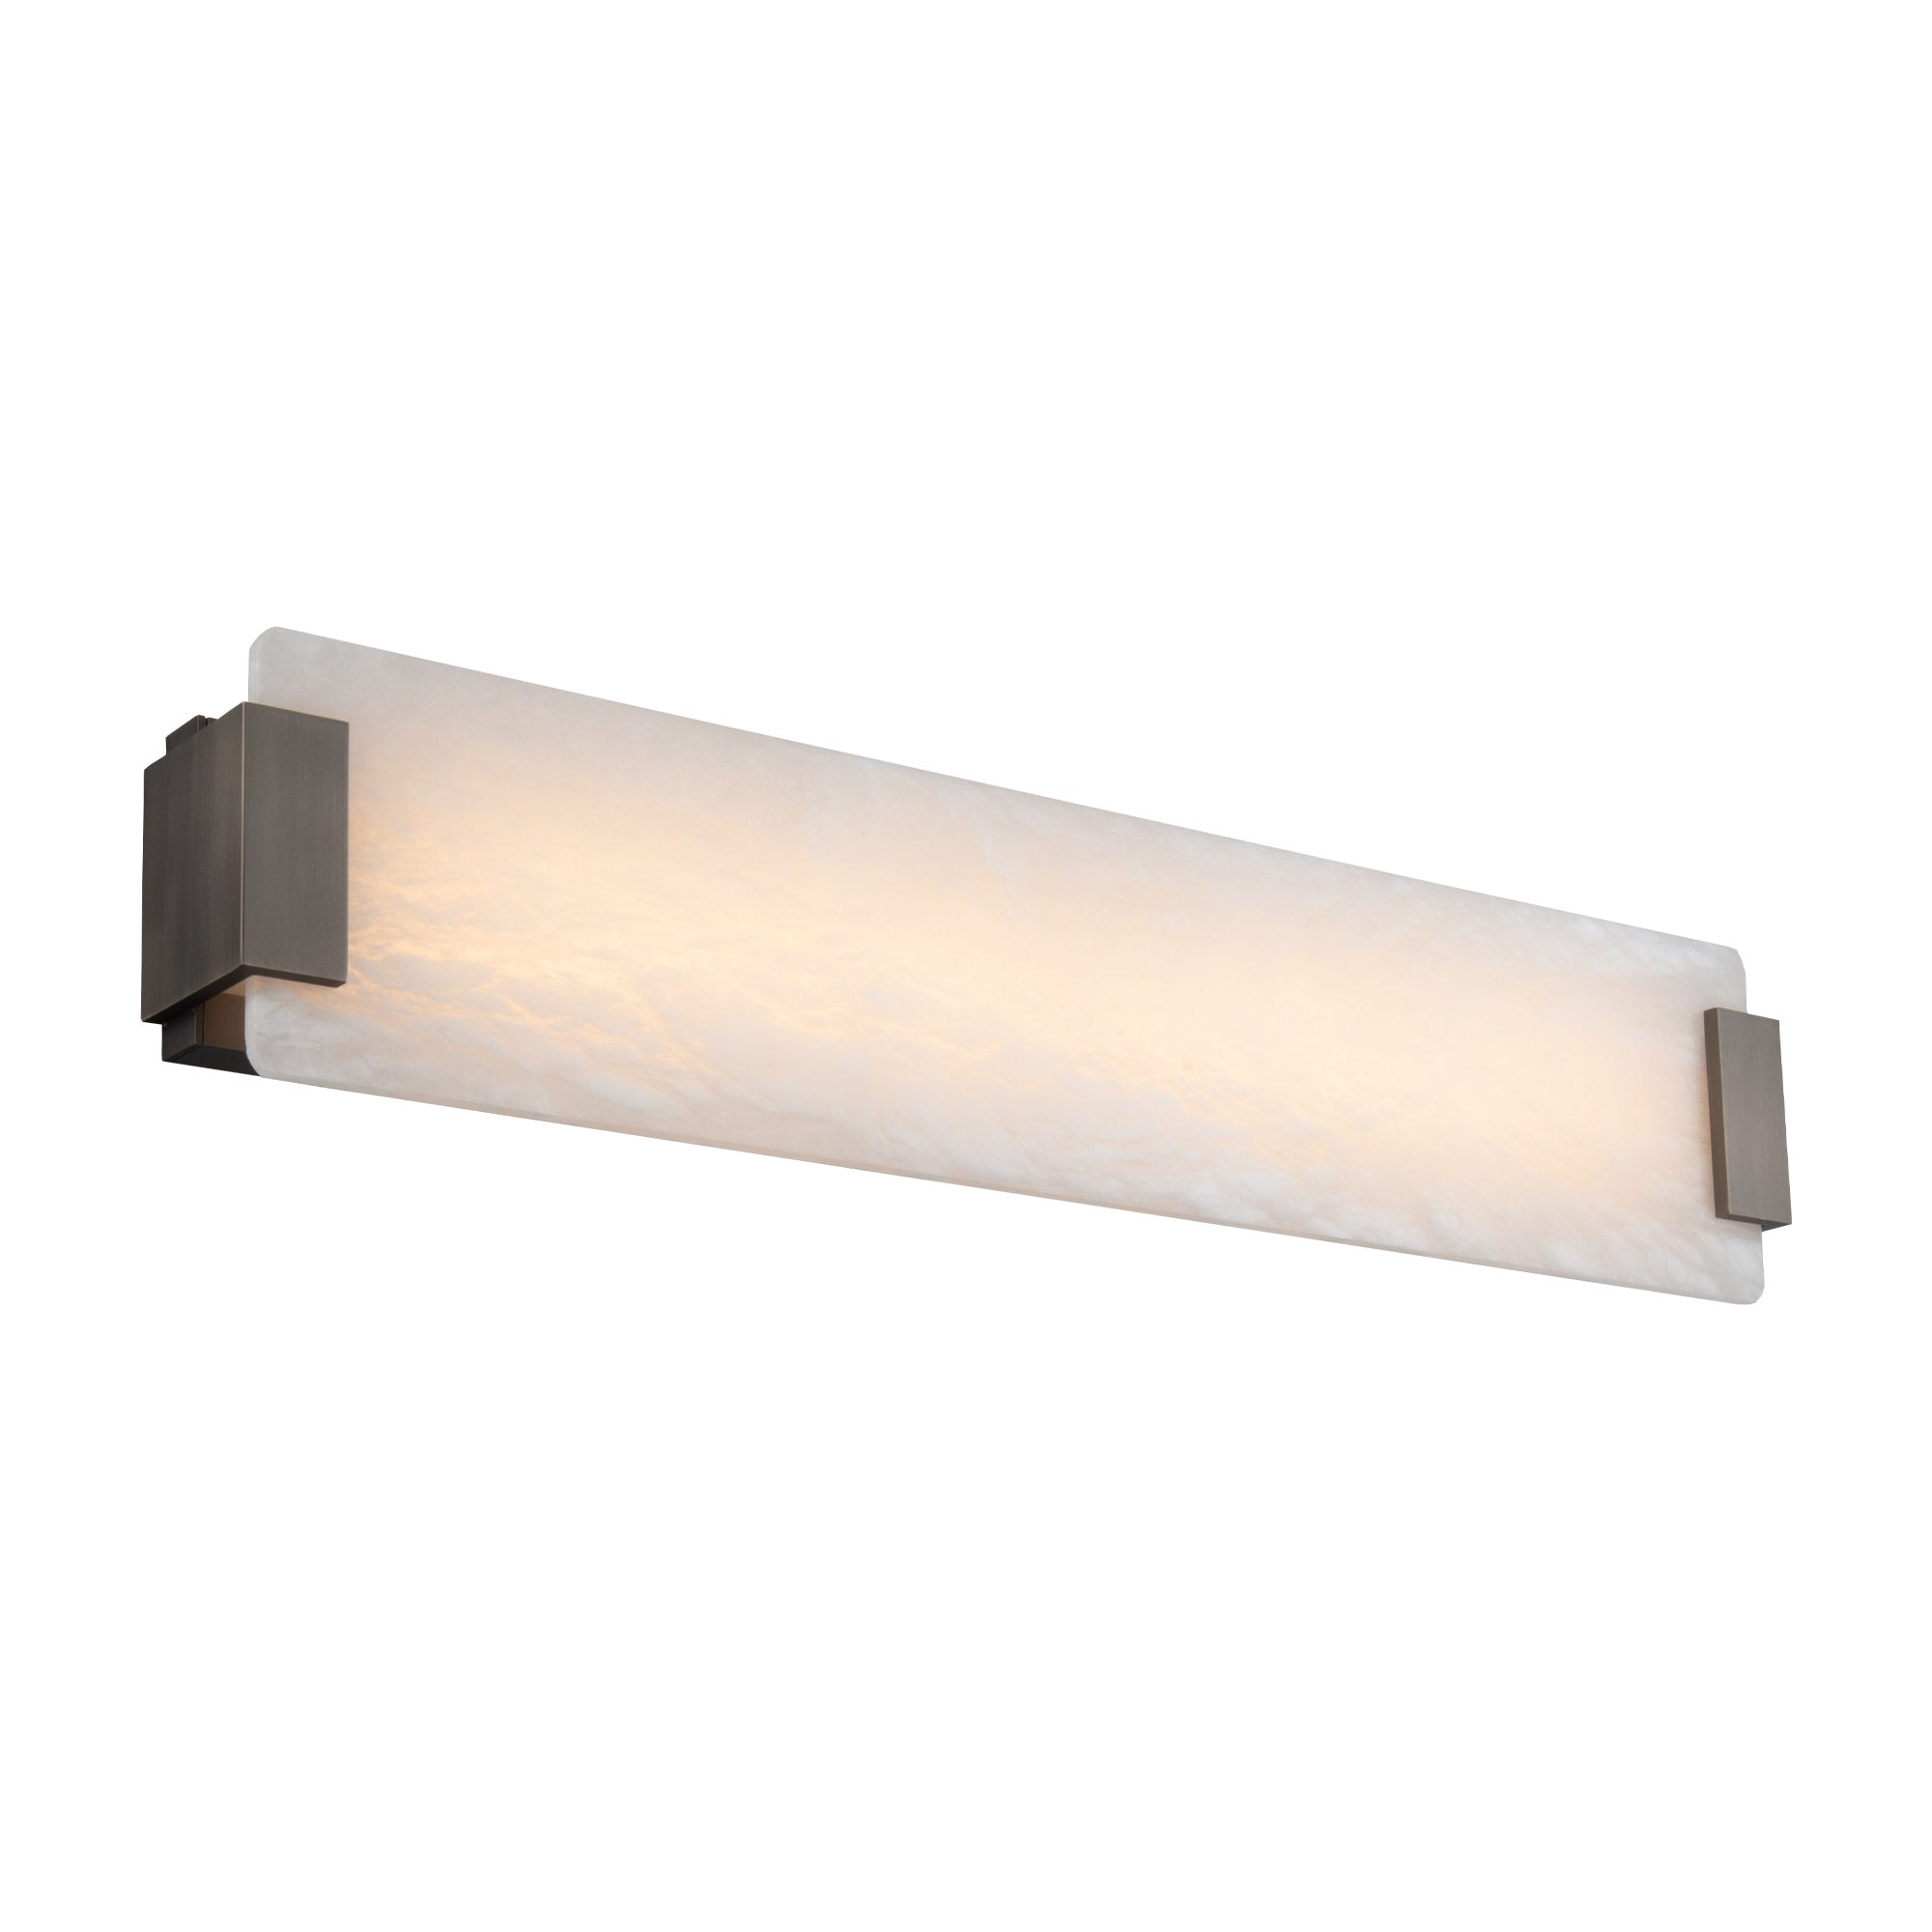 QUARRY Bathroom sconce Nickel INTEGRATED LED - WS-60028-BN | MODERN FORMS